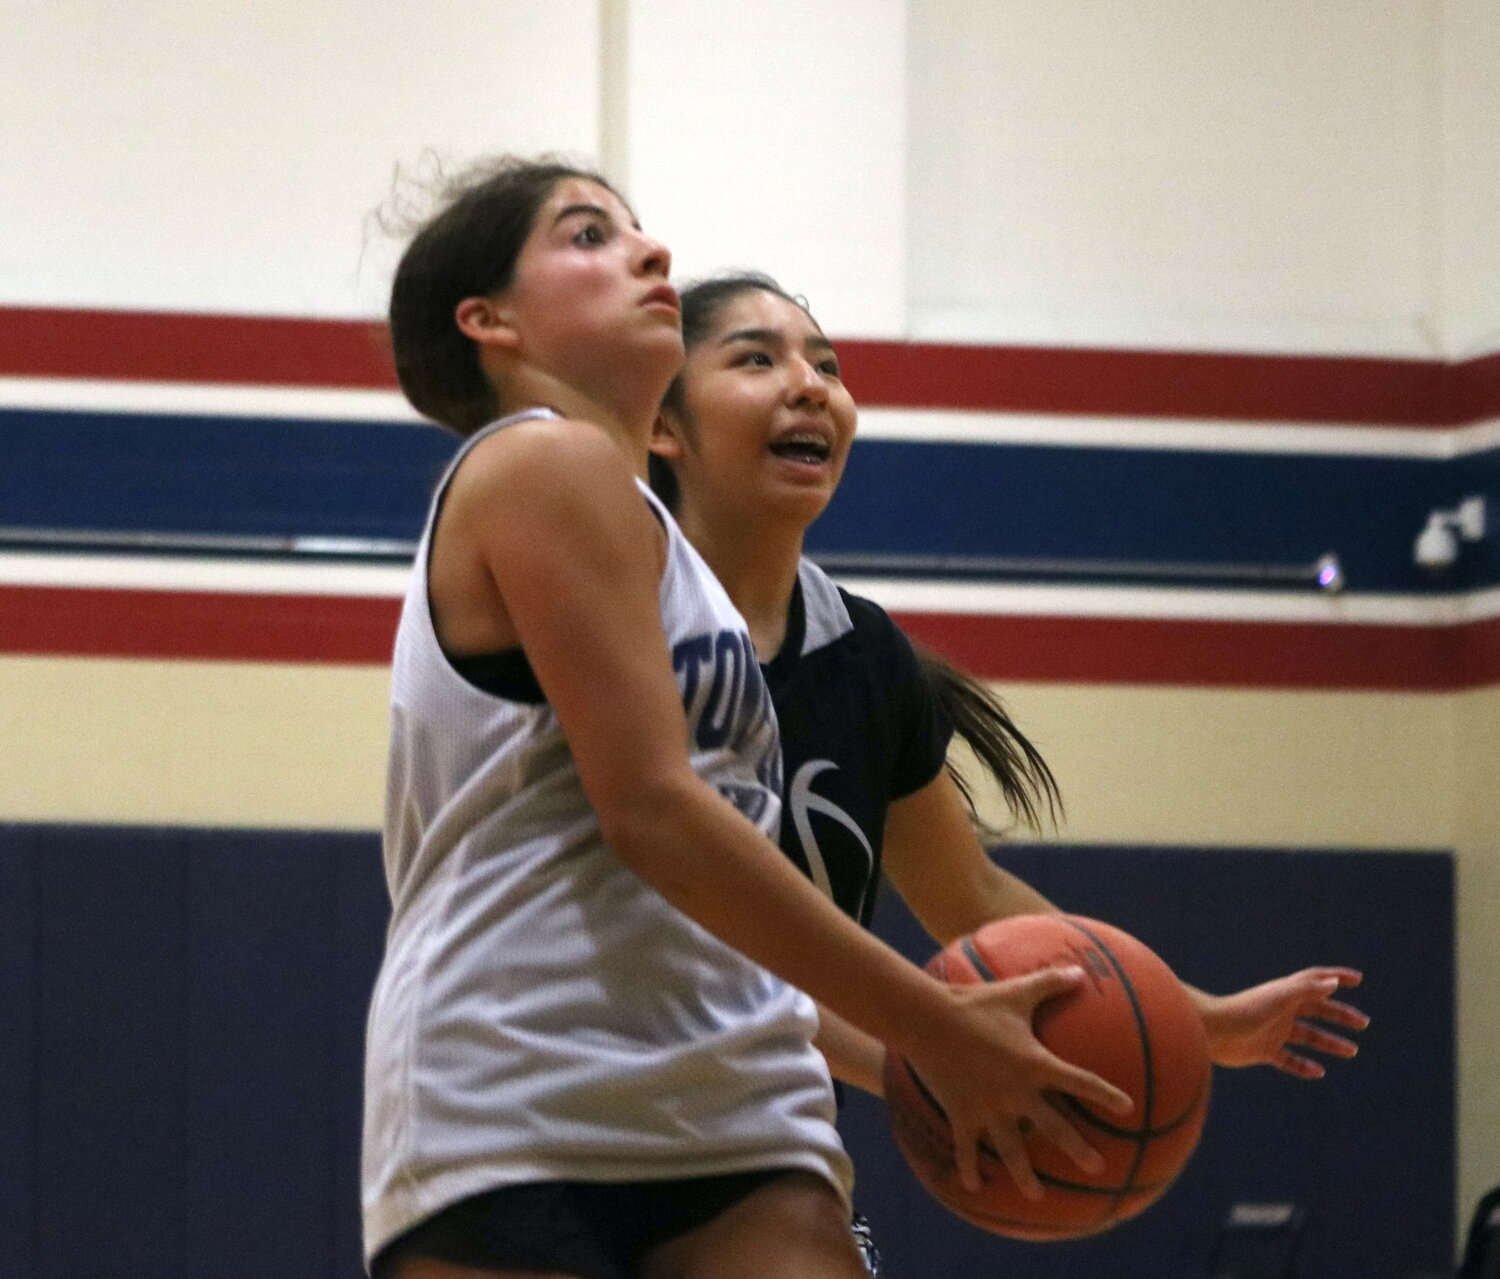 Sascha Cougran drives to the basket during Thursday's game between Tompkins and Laredo United South defenders at the Tompkins gym.